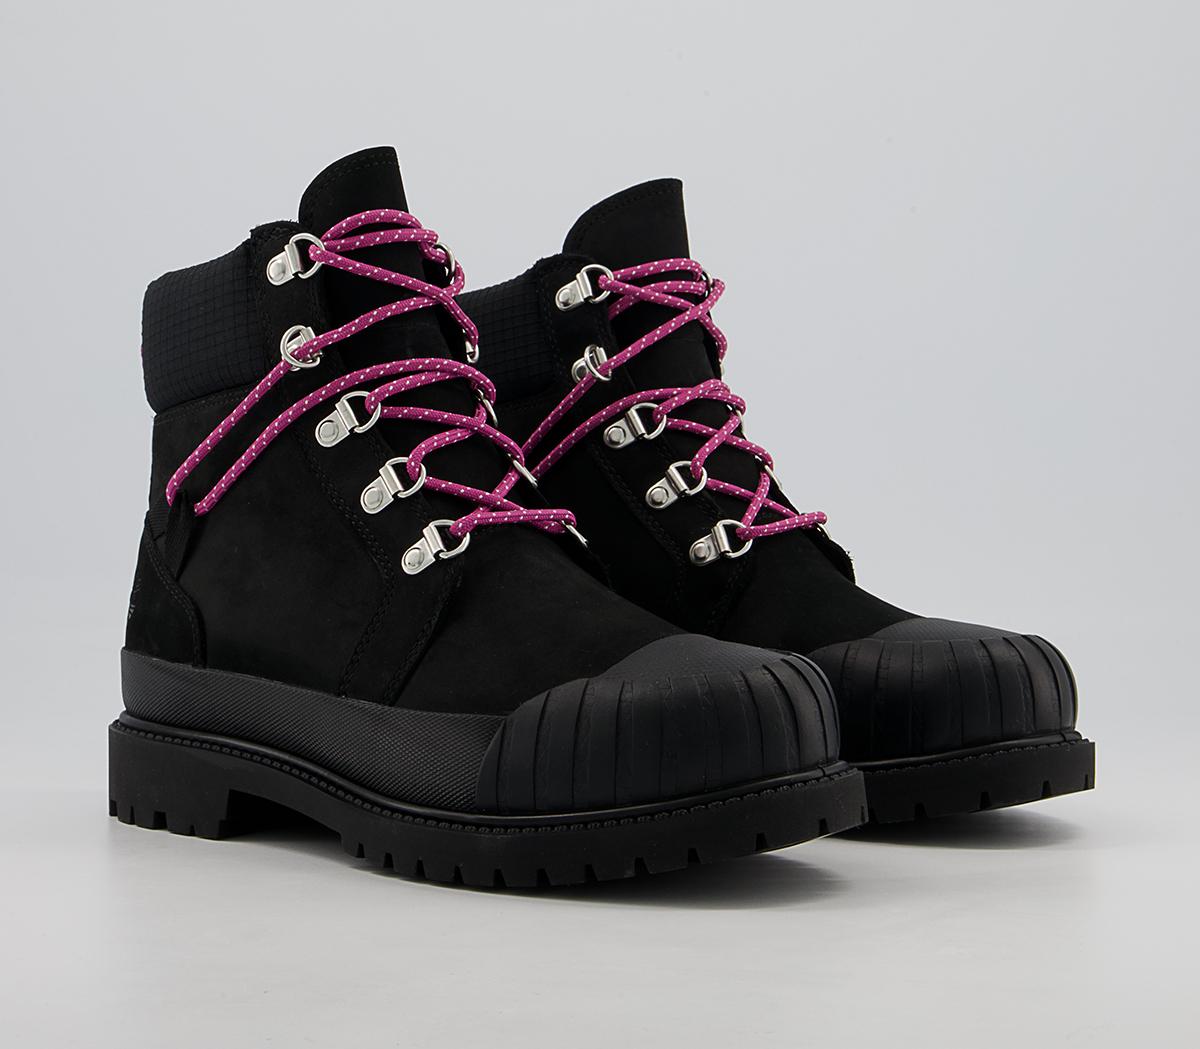 Timberland 6 Inch Heritage Rubber Toe Boots Black - Women's Ankle Boots